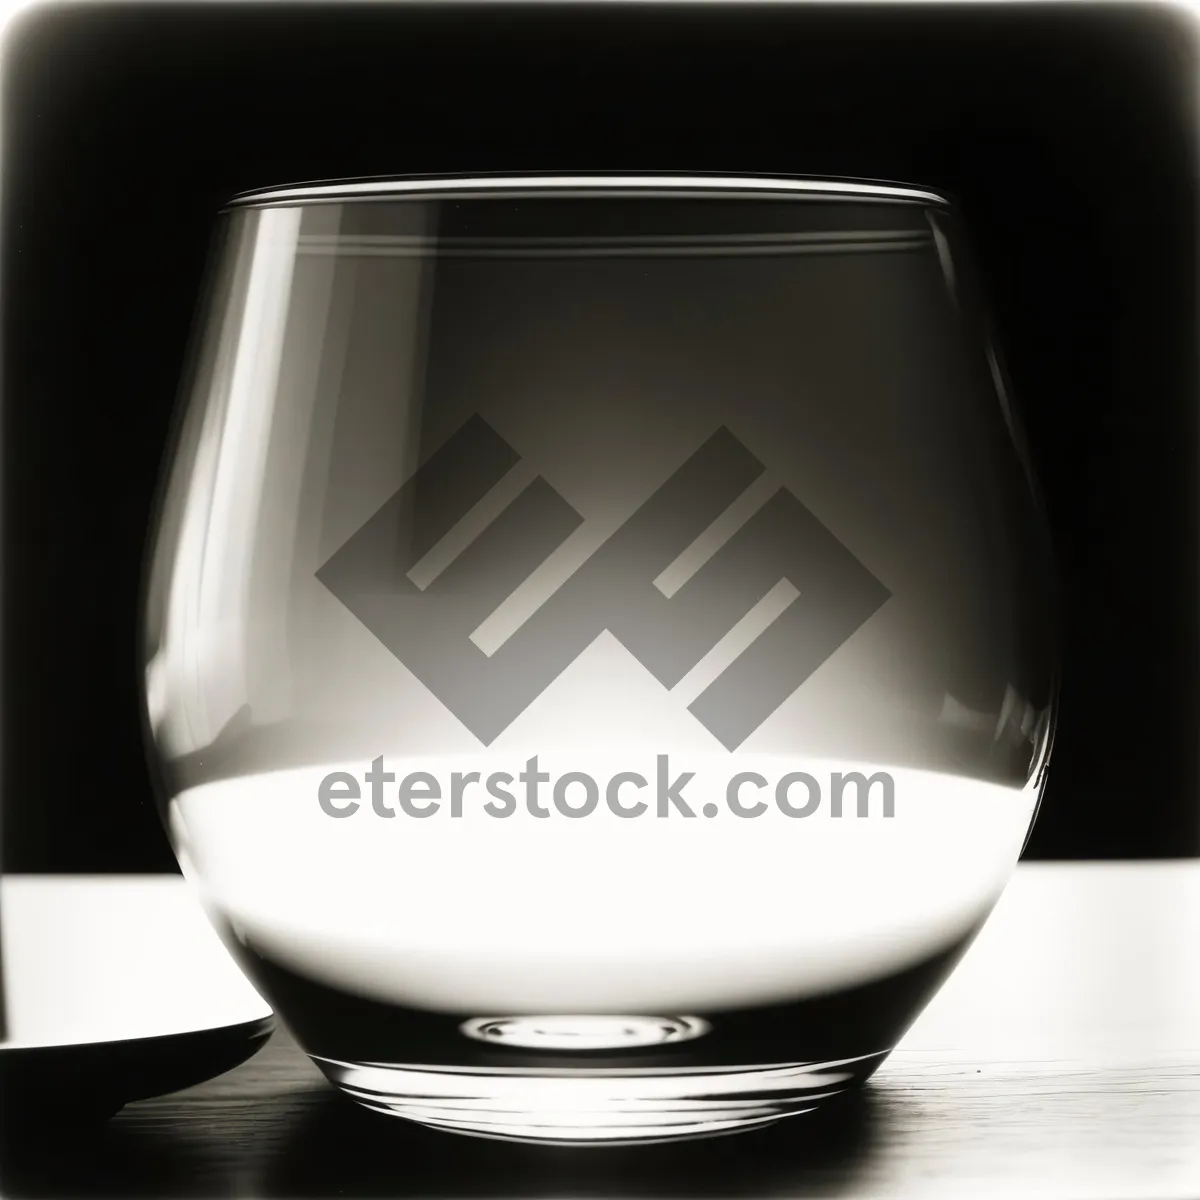 Picture of Morning Drink: Hot Coffee in Glass Cup